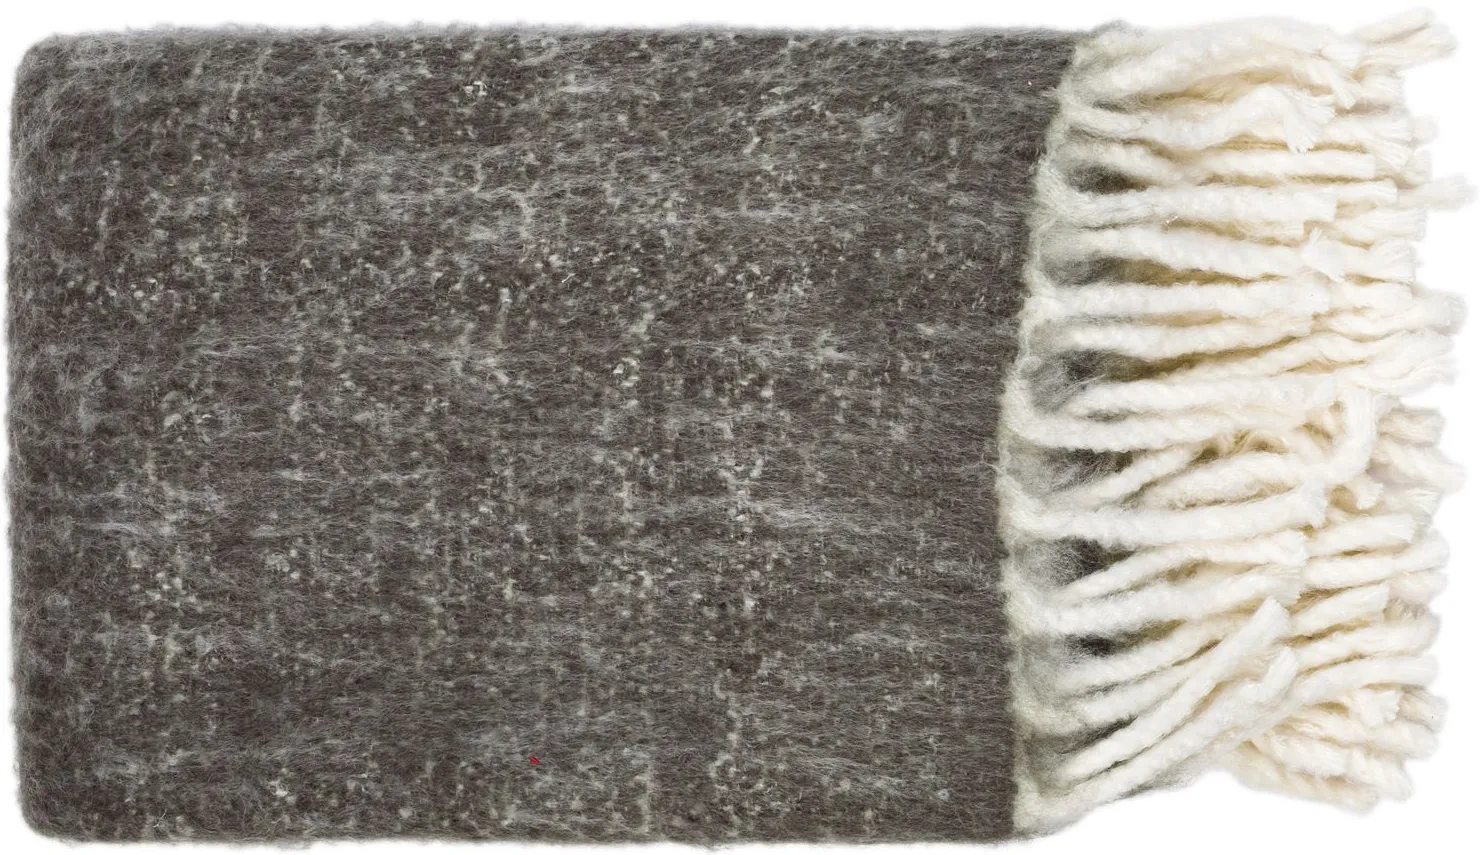 Kilkenny Throw in Charcoal, Cream by Surya